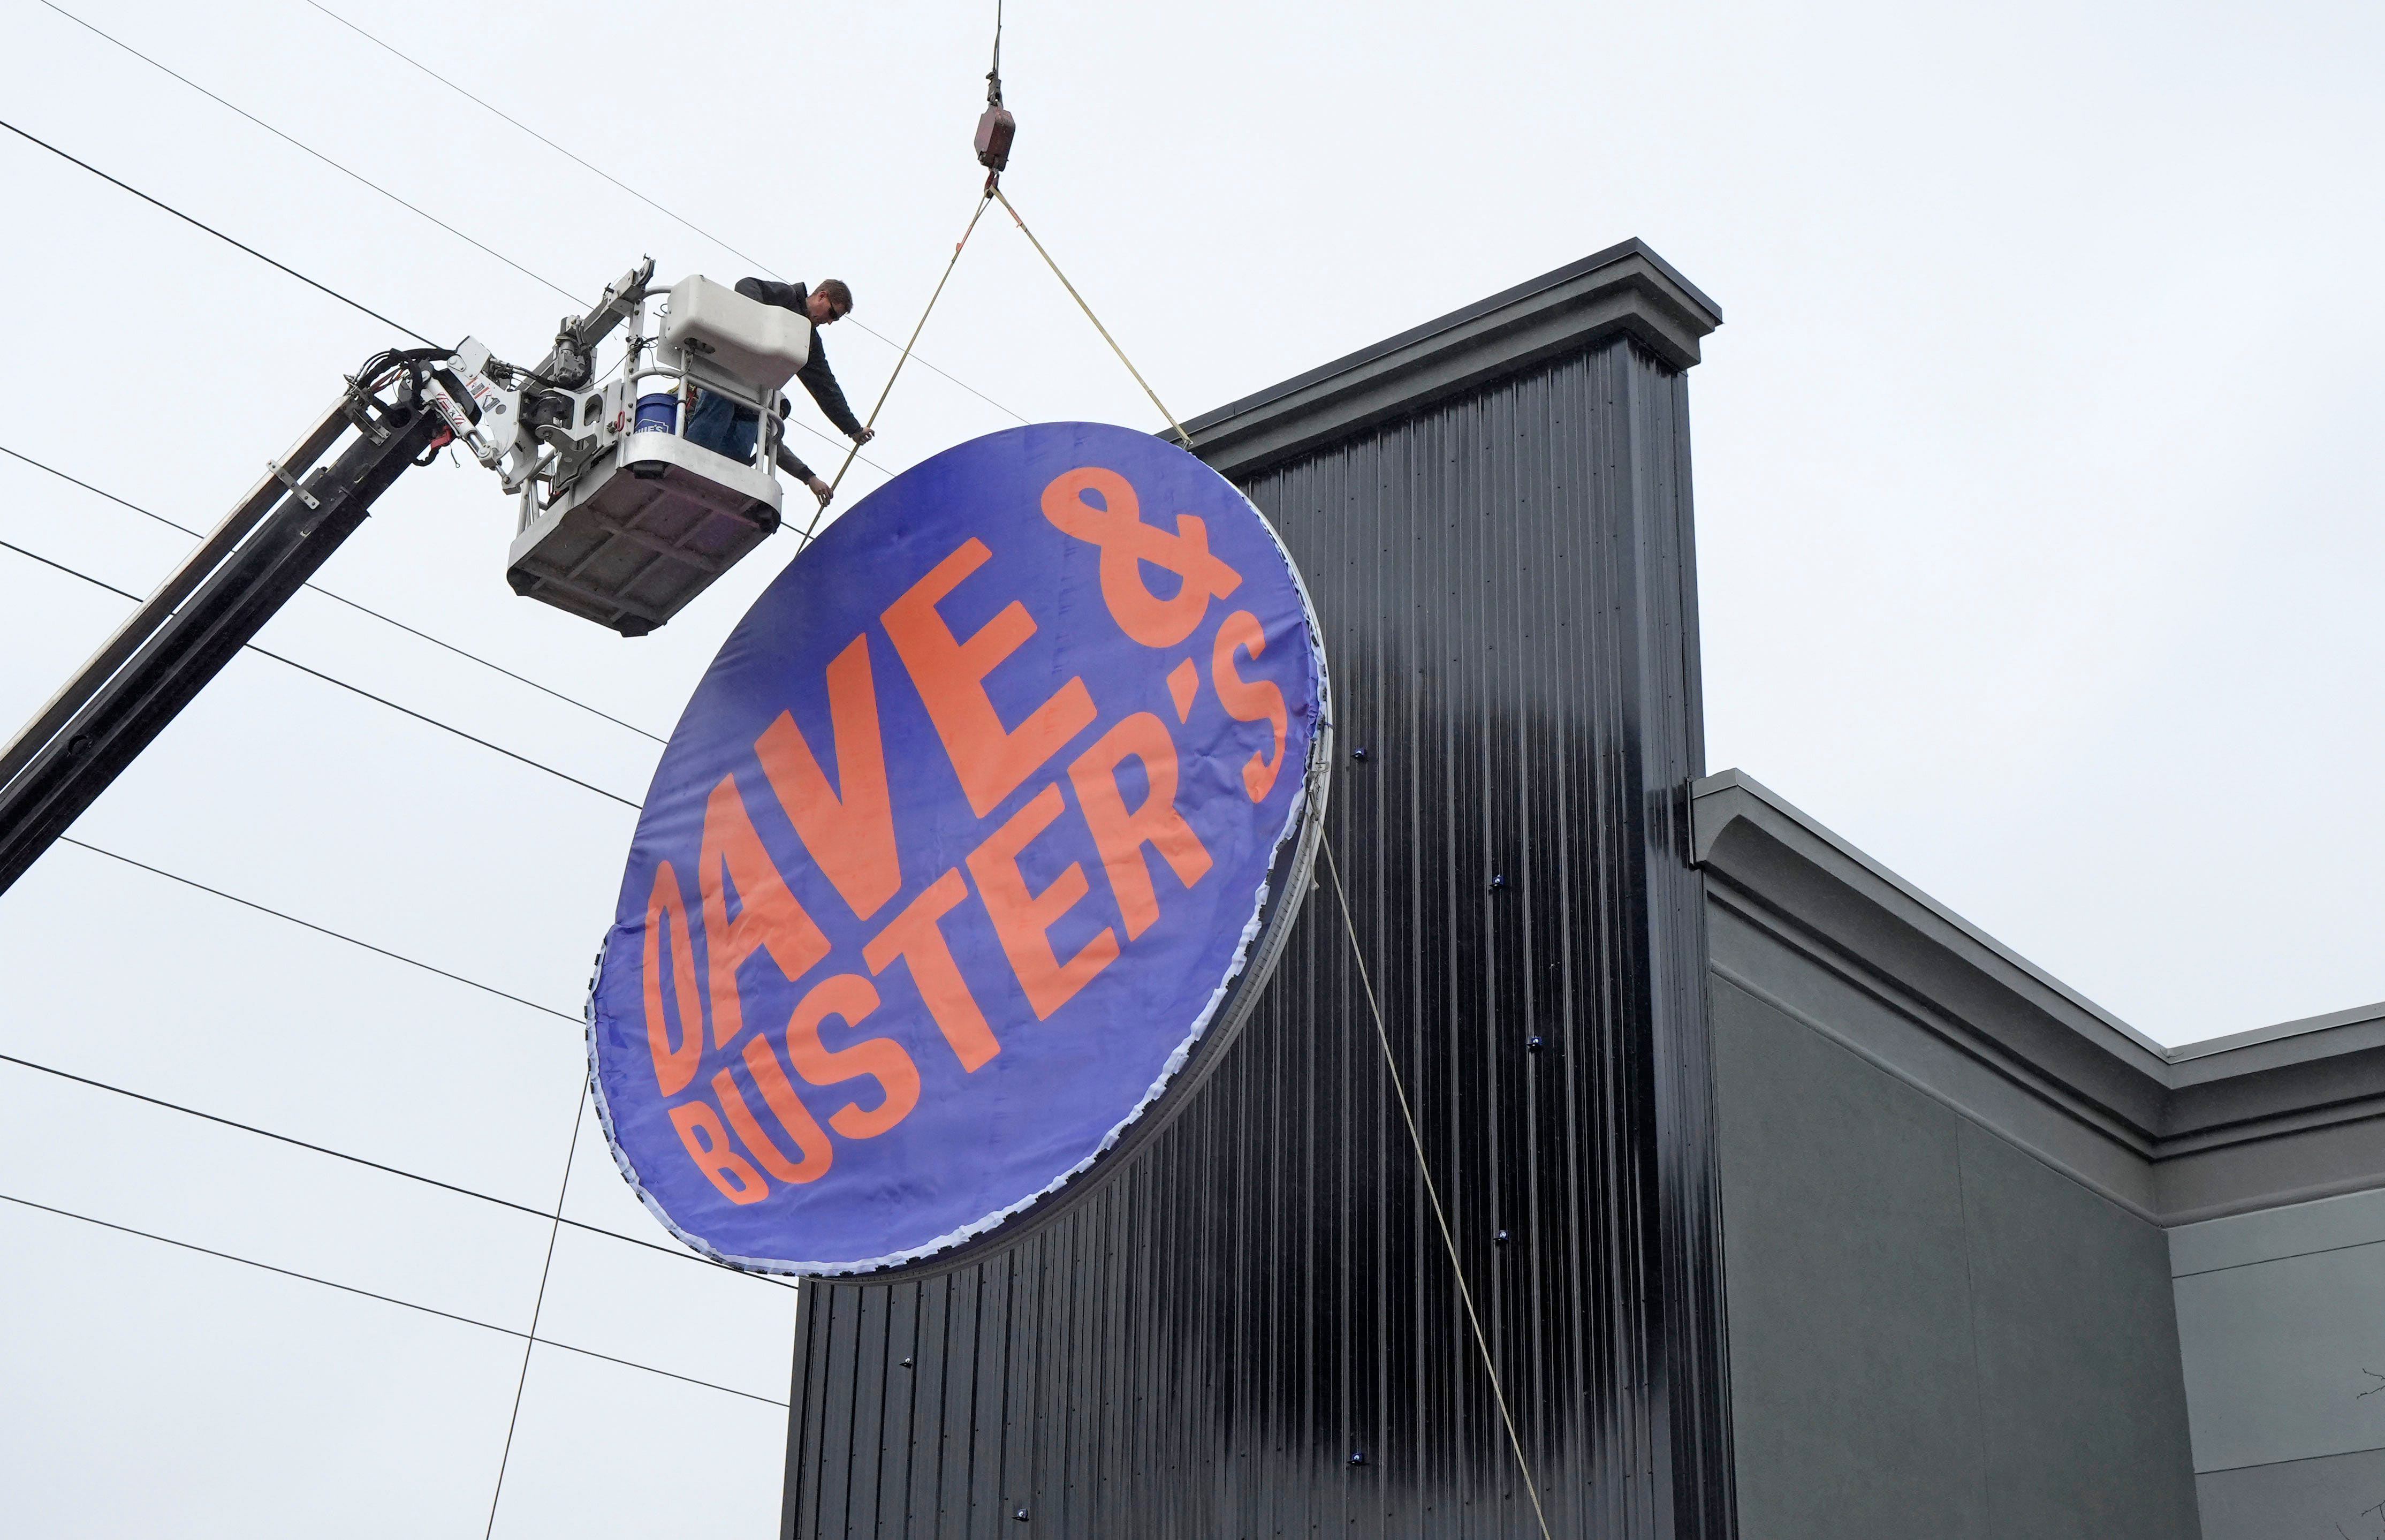 How To Bet - Illinois Committee Advances Anti-Dave & Buster’s Betting Bill